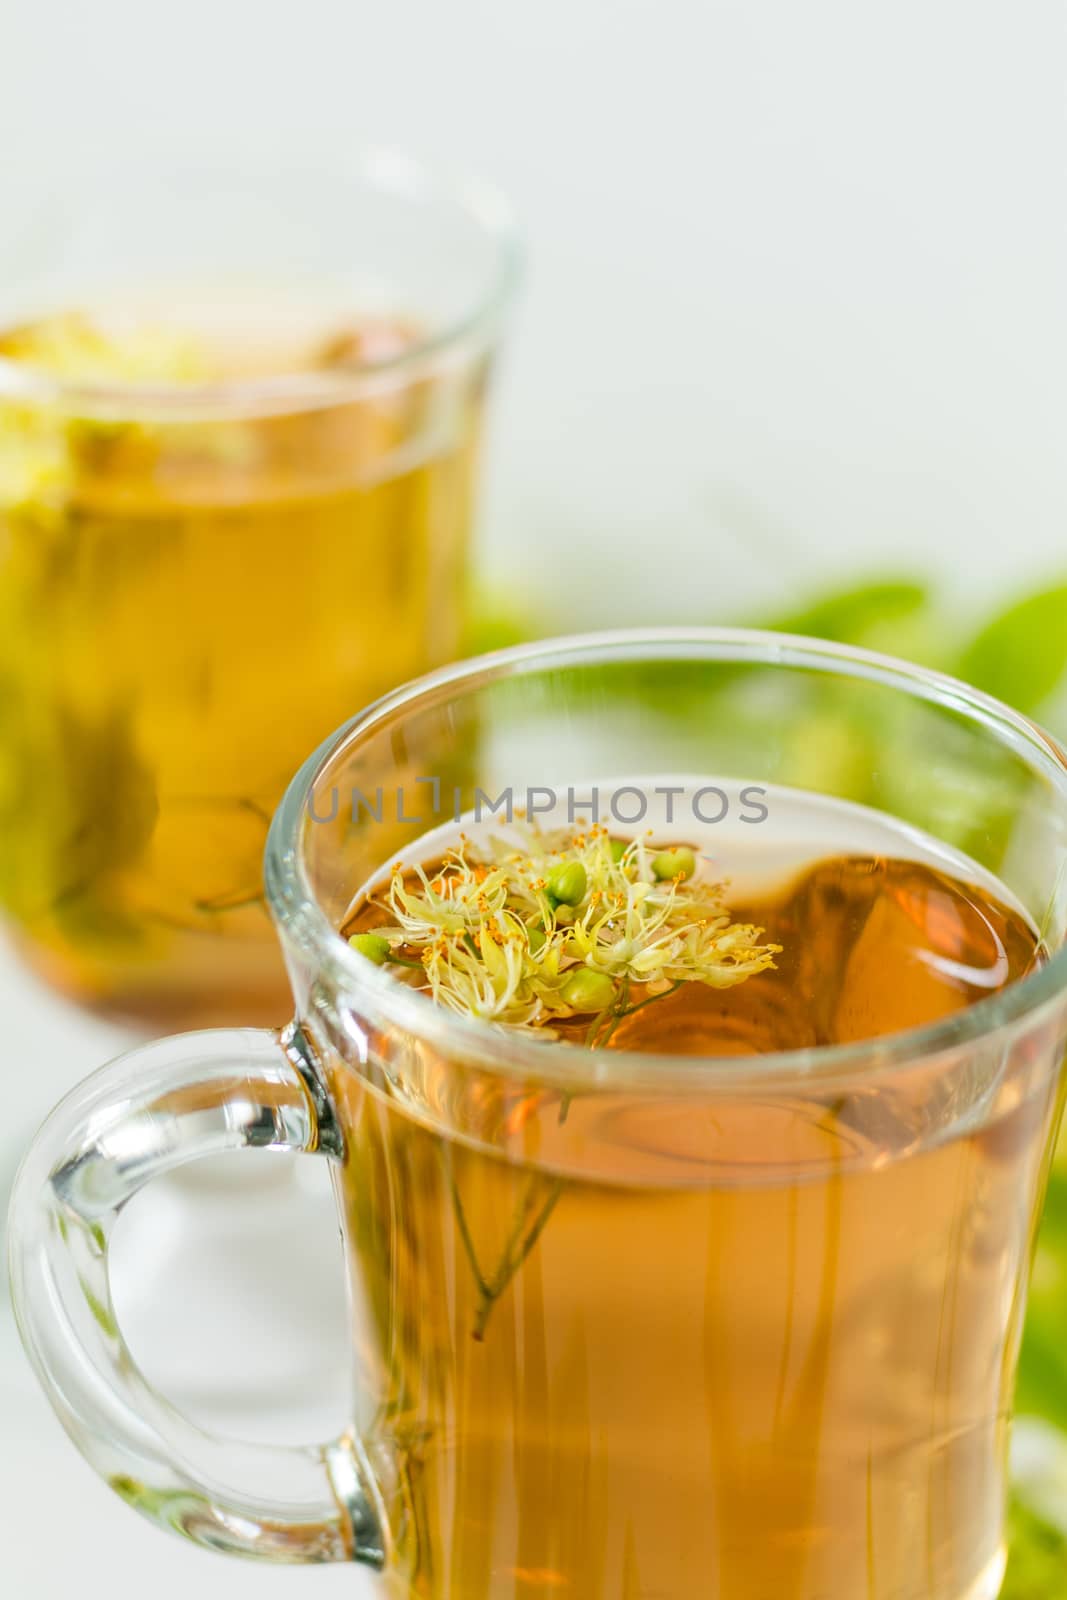 Linden flower tea in a transparent grog glass with a linden blossom on the white wooden surface